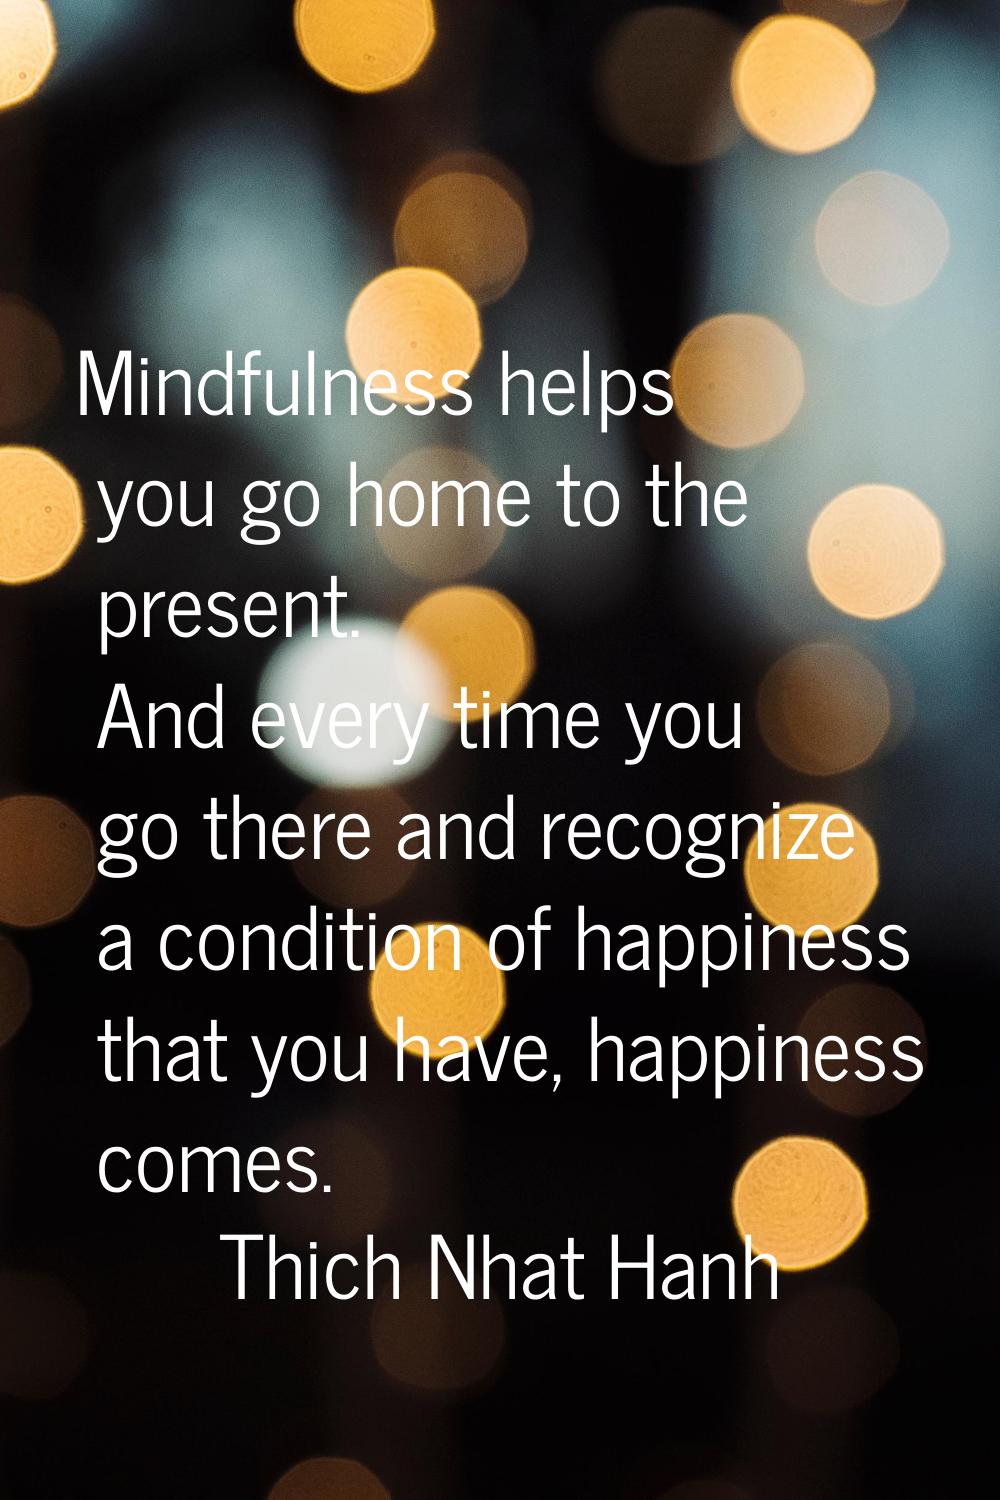 Mindfulness helps you go home to the present. And every time you go there and recognize a condition